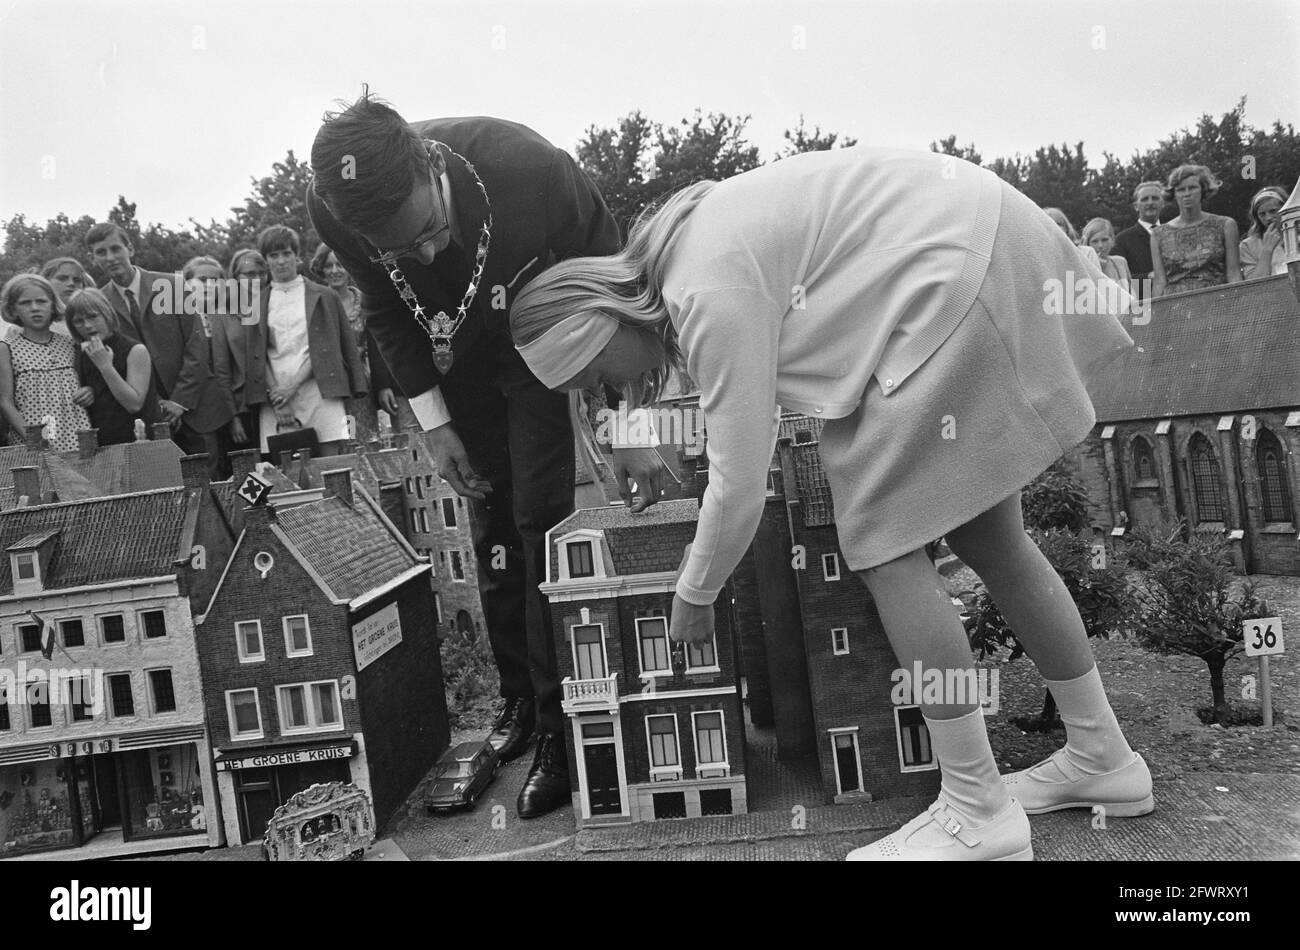 Princess Marie Astrid of Luxembourg opened Benelux exhibition at Madurodam. The Princess and of The Hague youth during a visit to Madurodam, June 14, 1968, Youth, visits, princesses, The Netherlands, 20th century press agency photo, news to remember, documentary, historic photography 1945-1990, visual stories, human history of the Twentieth Century, capturing moments in time Stock Photo